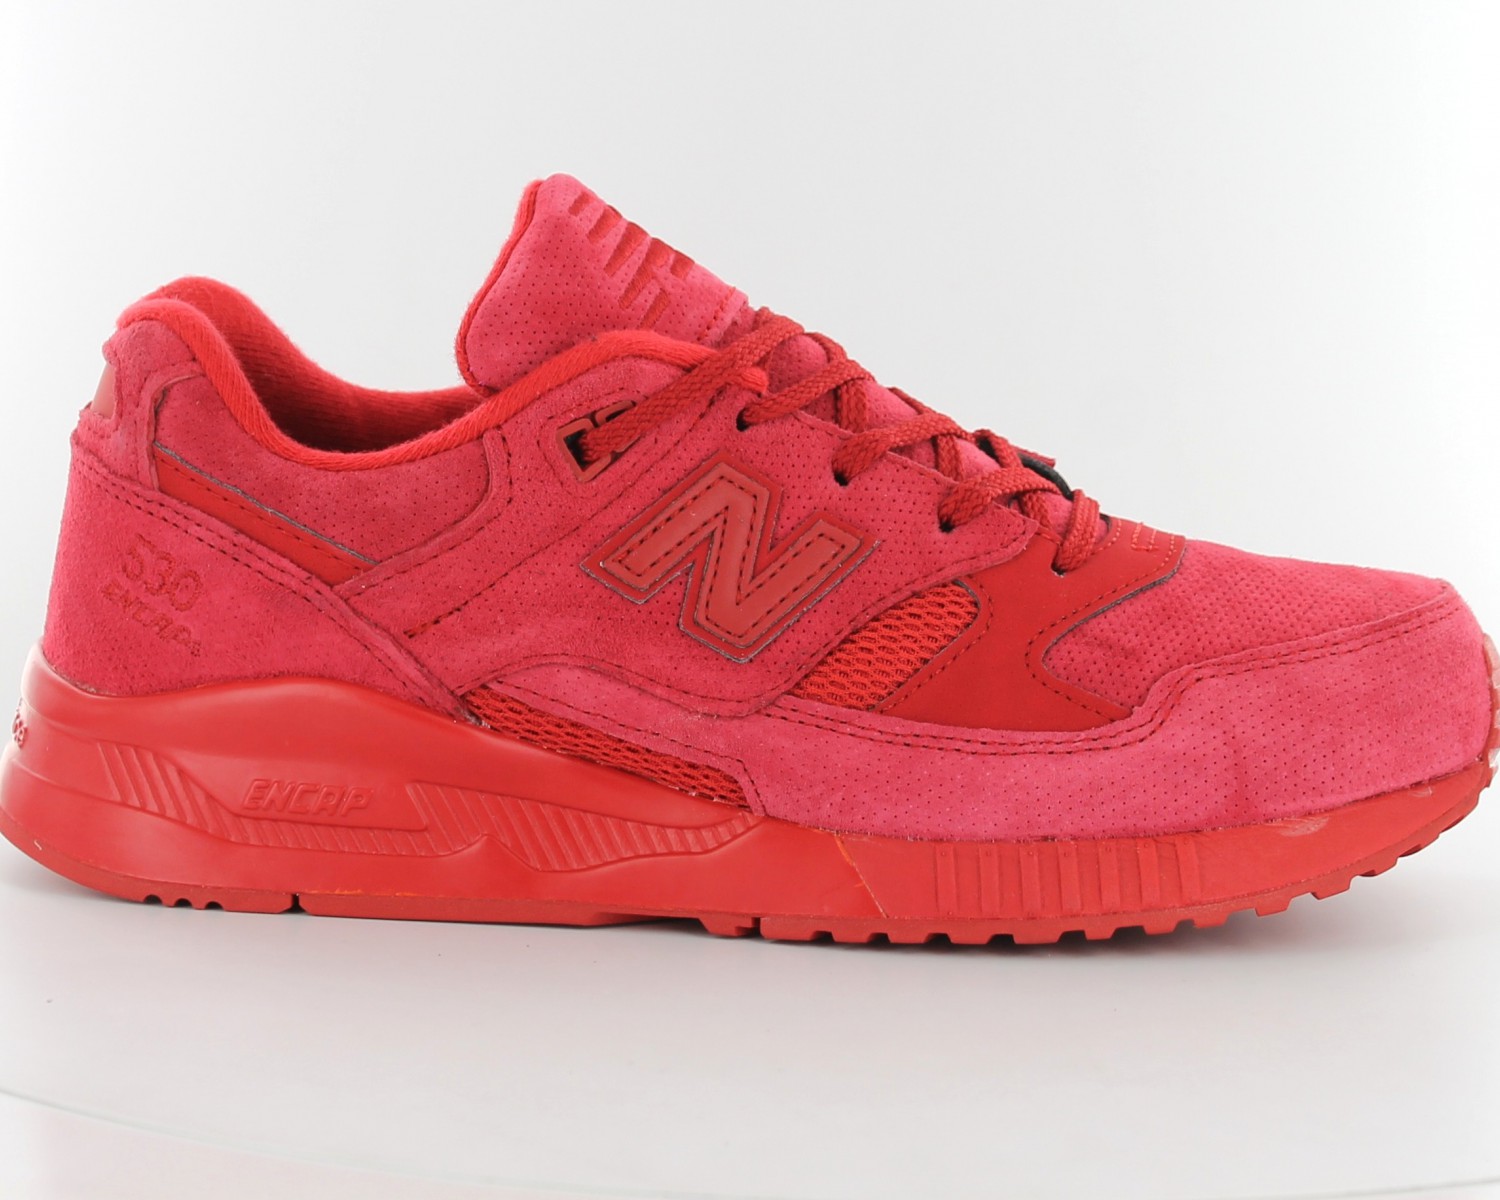 New Balance 530 Homme Triple/red | peacecommission.kdsg.gov.ng